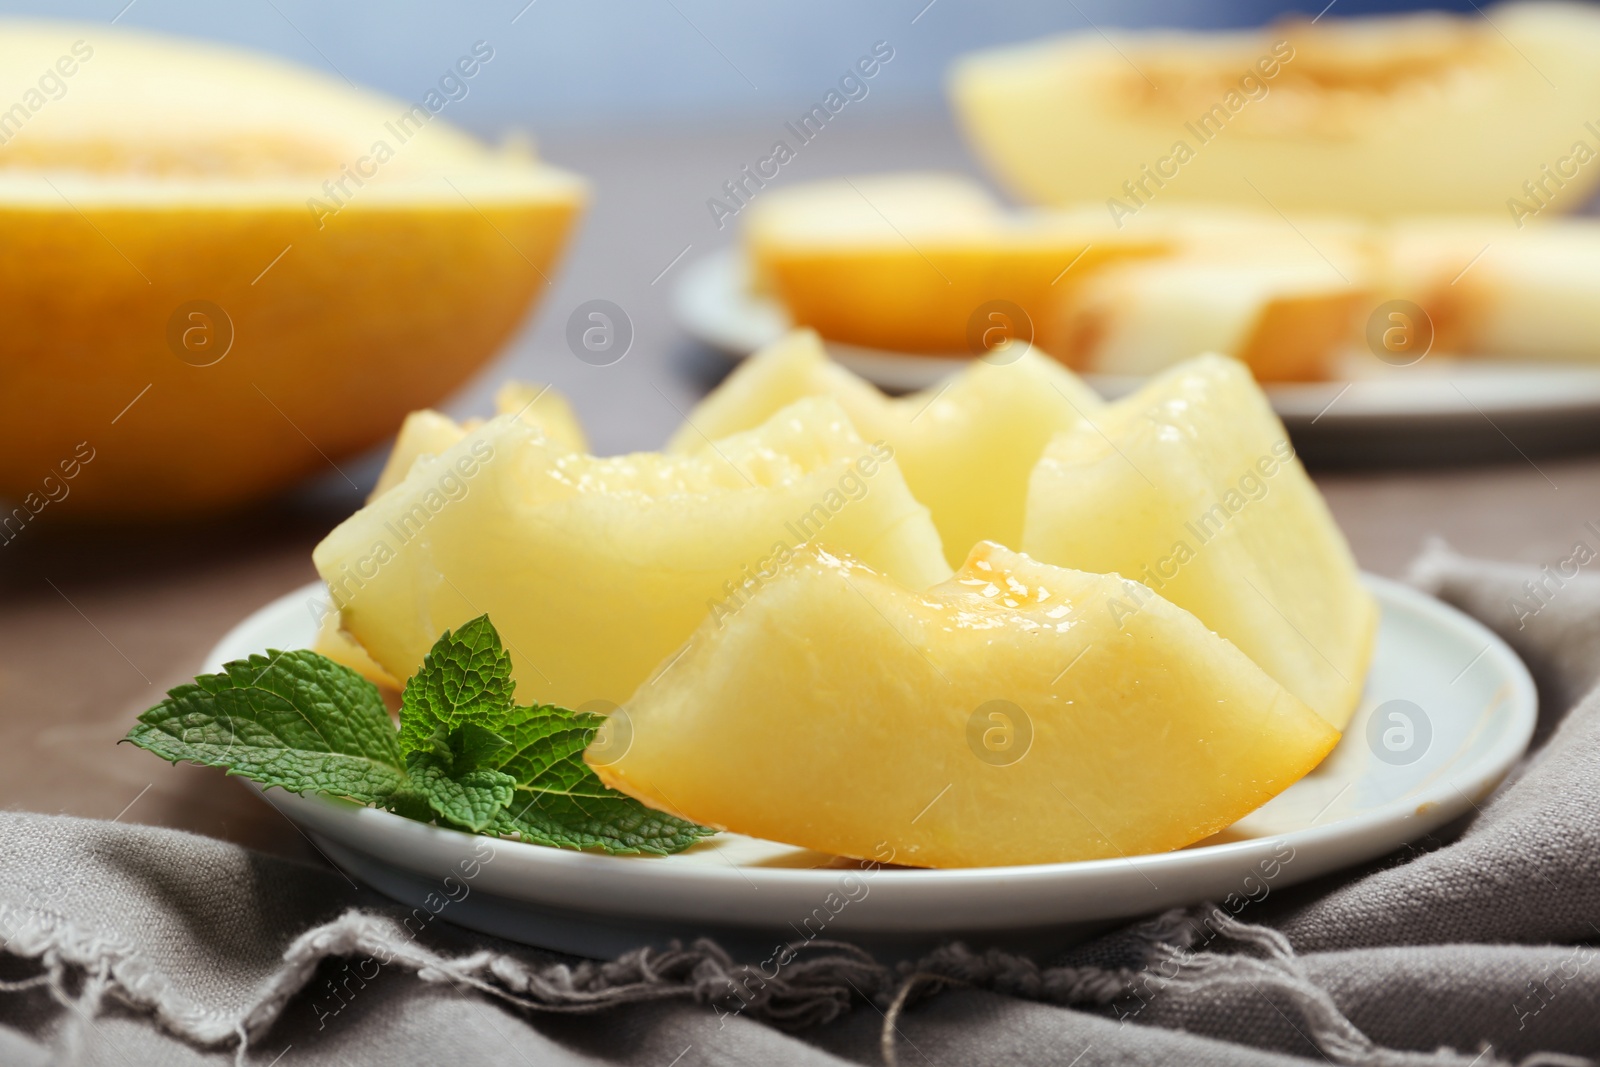 Photo of Plate with cut sweet melon on table